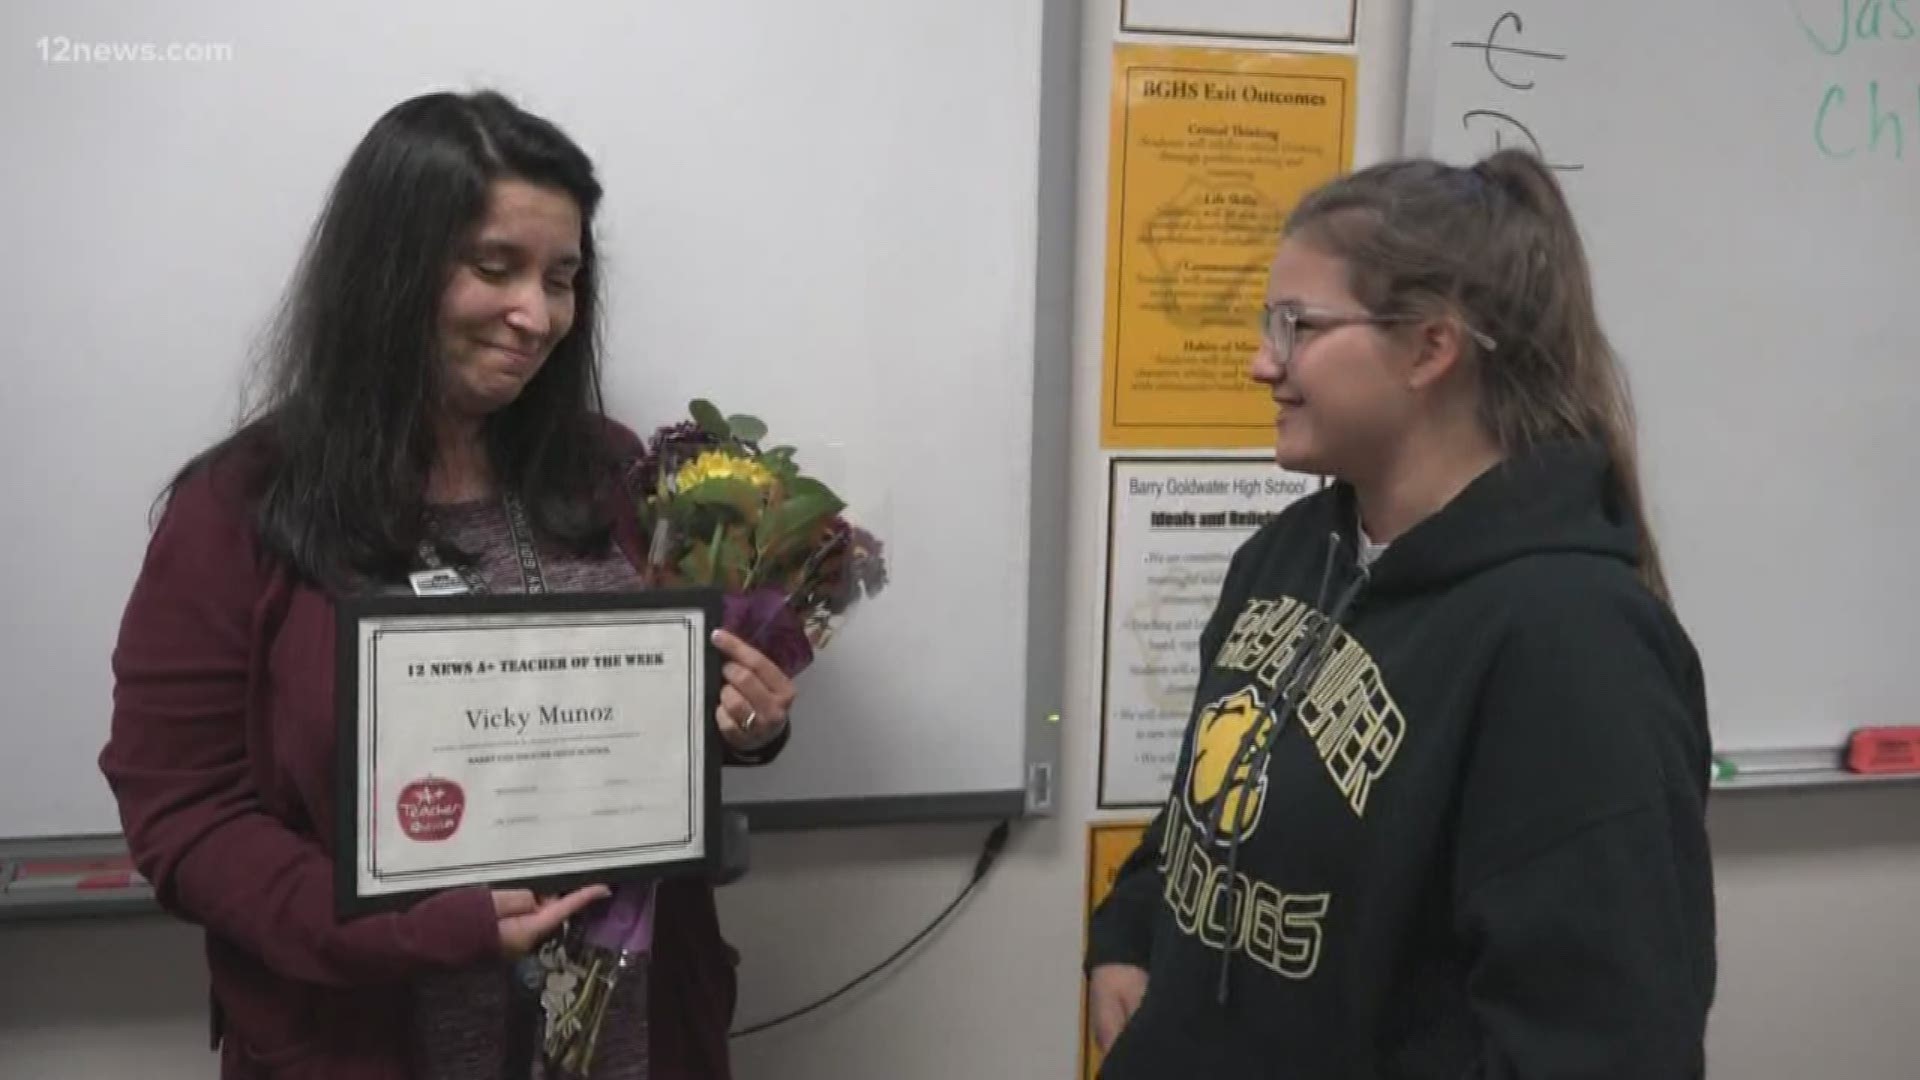 Vicky Munoz goes above and beyond for her students. Trisha Hendricks shows us why she's the teacher of the week.